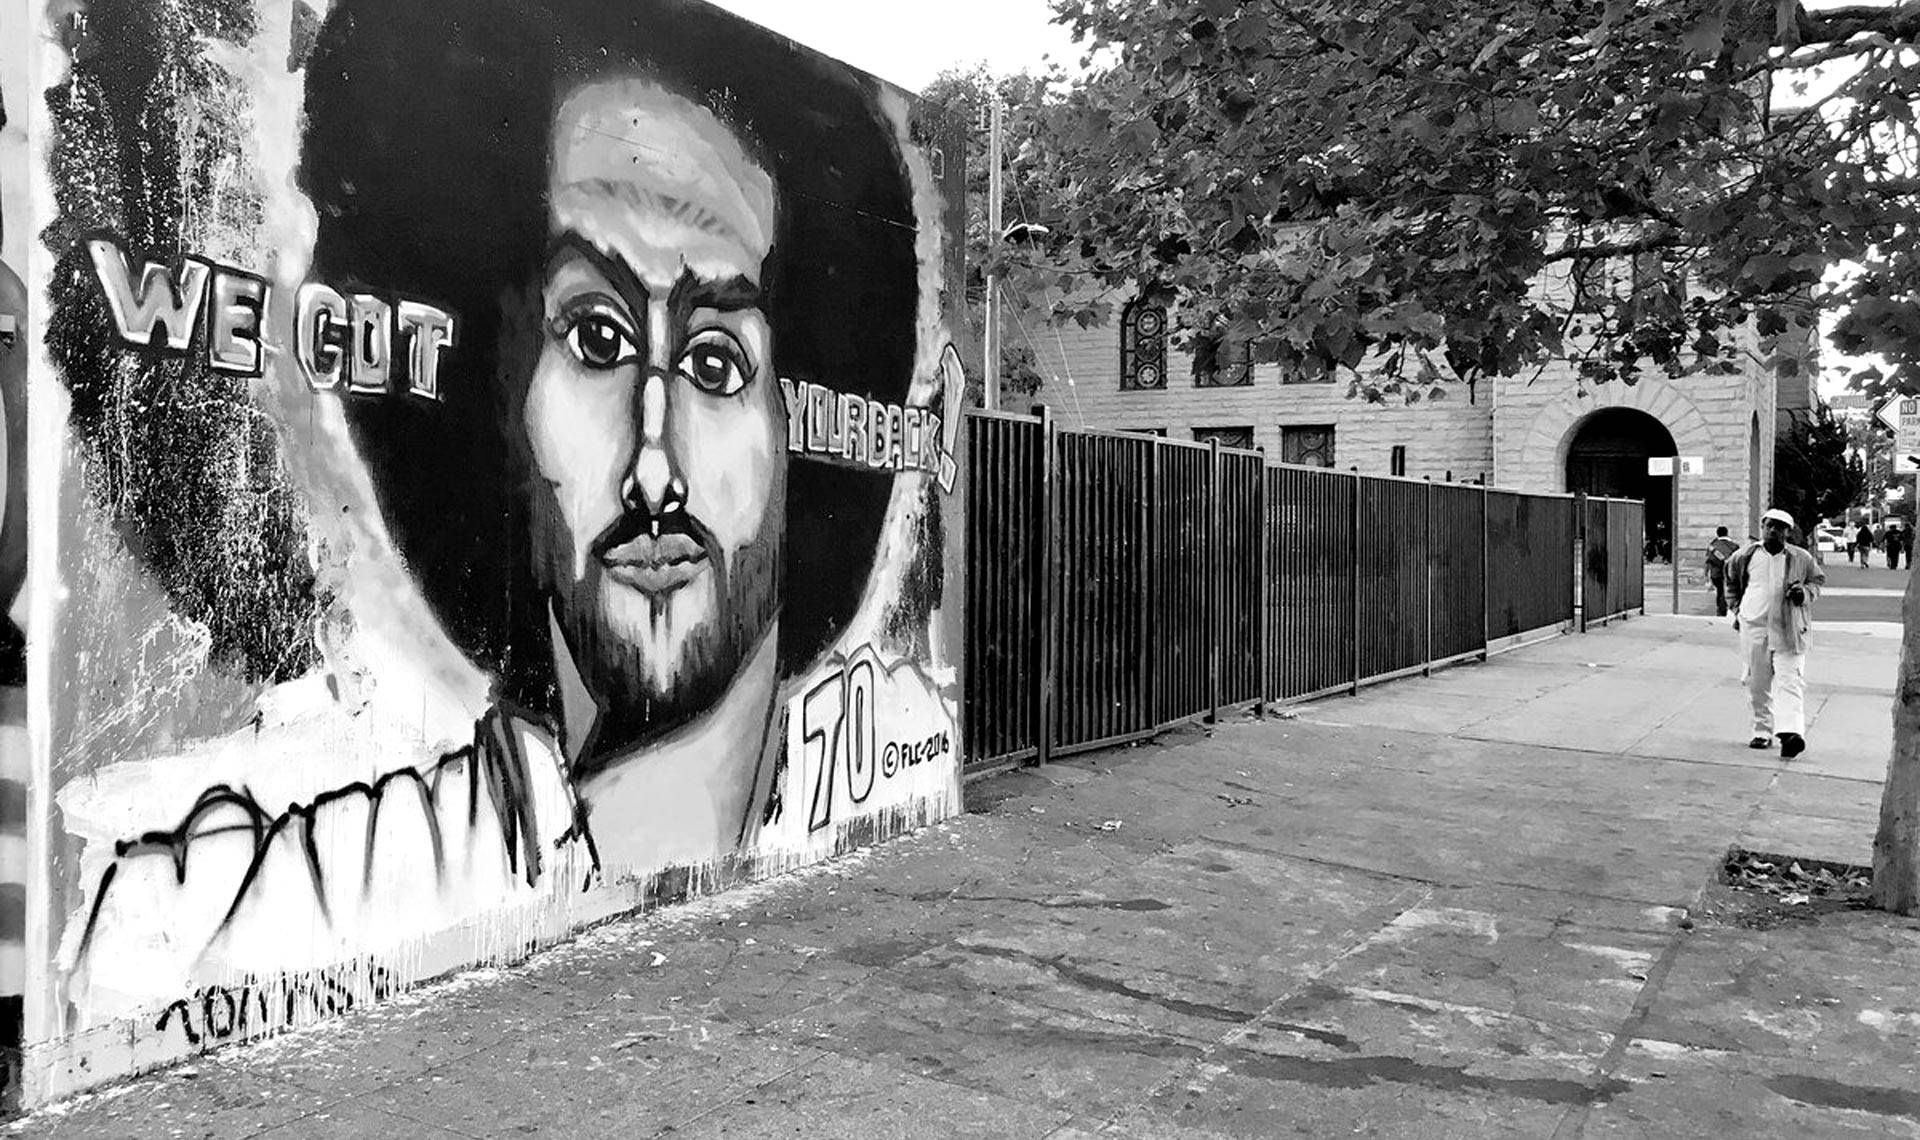 A mural of Colin Kaepernick on Telegraph Ave. in Oakland, circa 2016. Pendarvis Harshaw